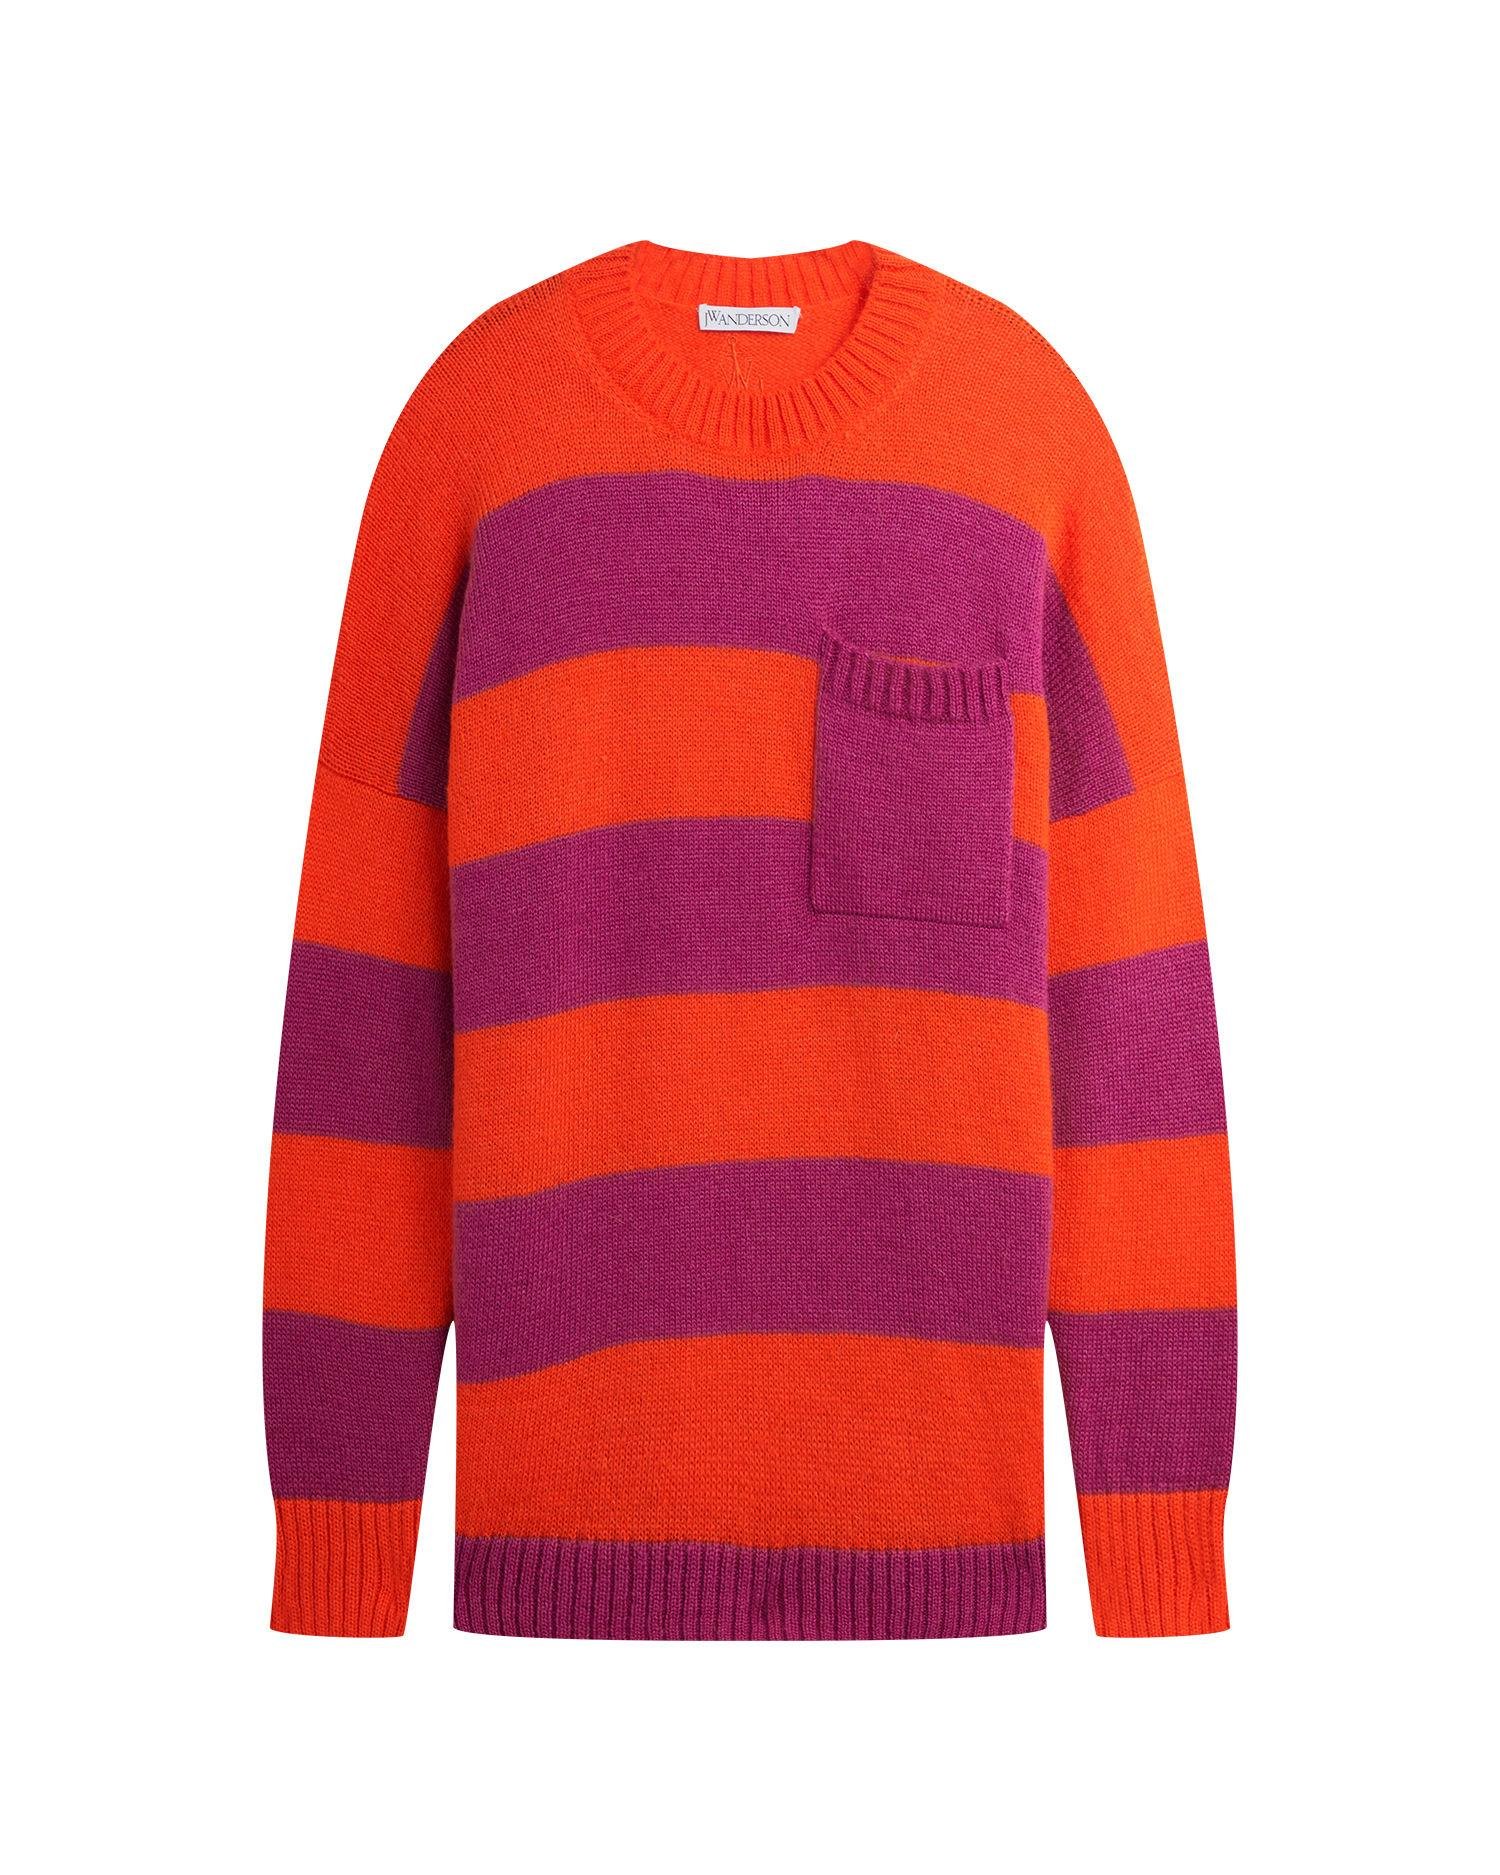 Striped patchpocket knit crew neck by JW ANDERSON